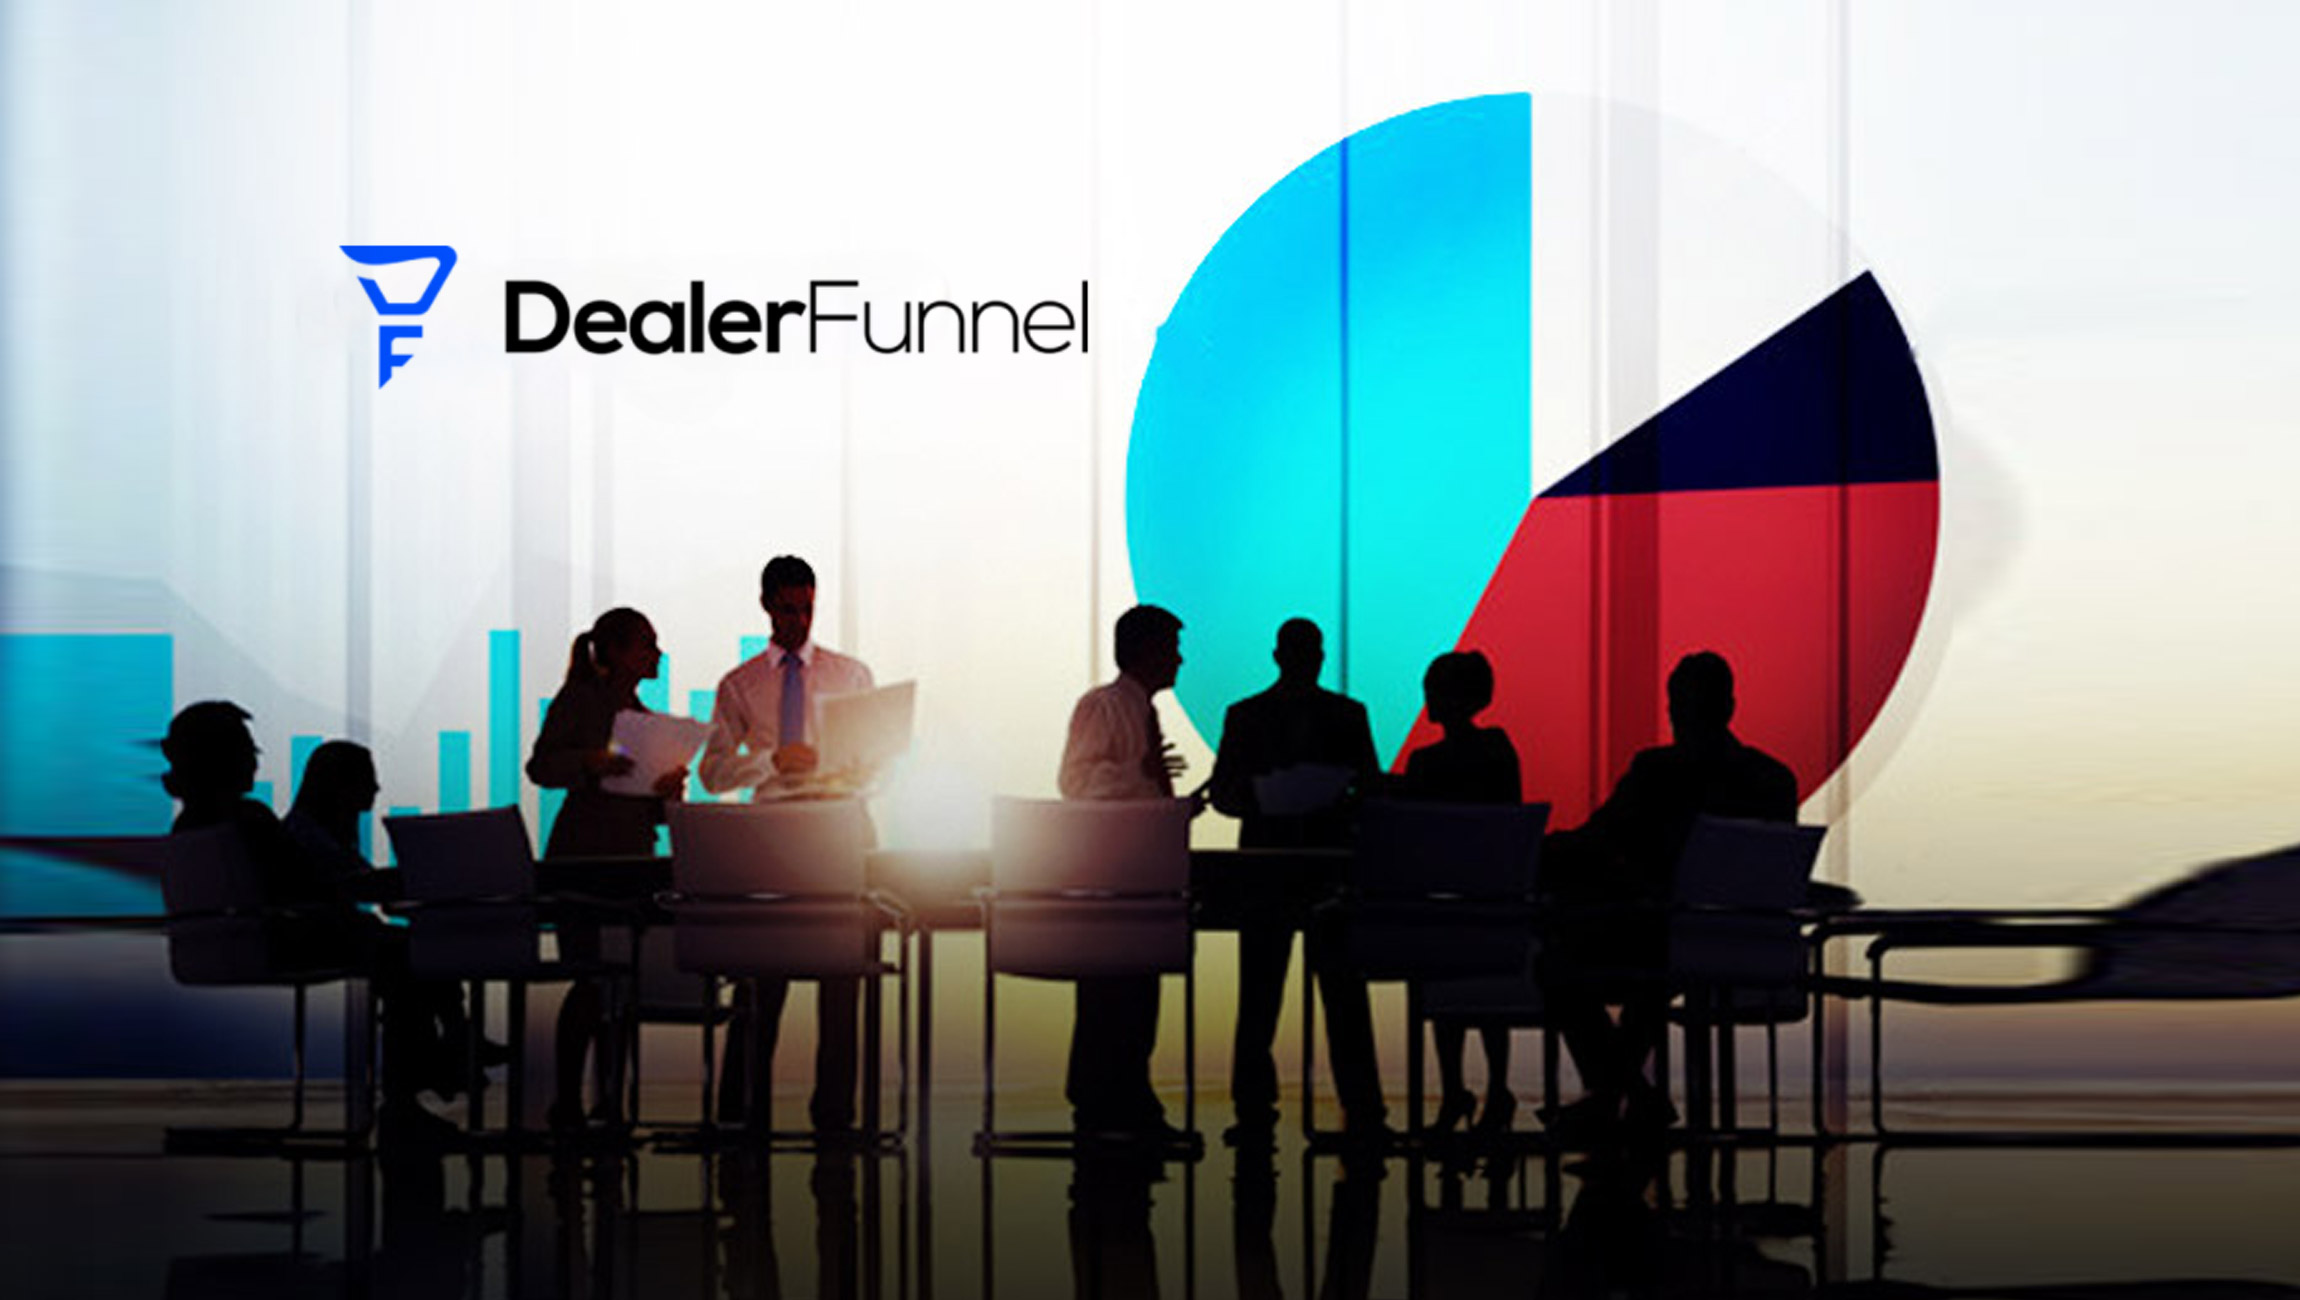 New-Dealer-Funnel-Comprehensive-Text-Messaging-Solution-For-Auto-Dealers-Engages-Customers-_-Increases-Sales